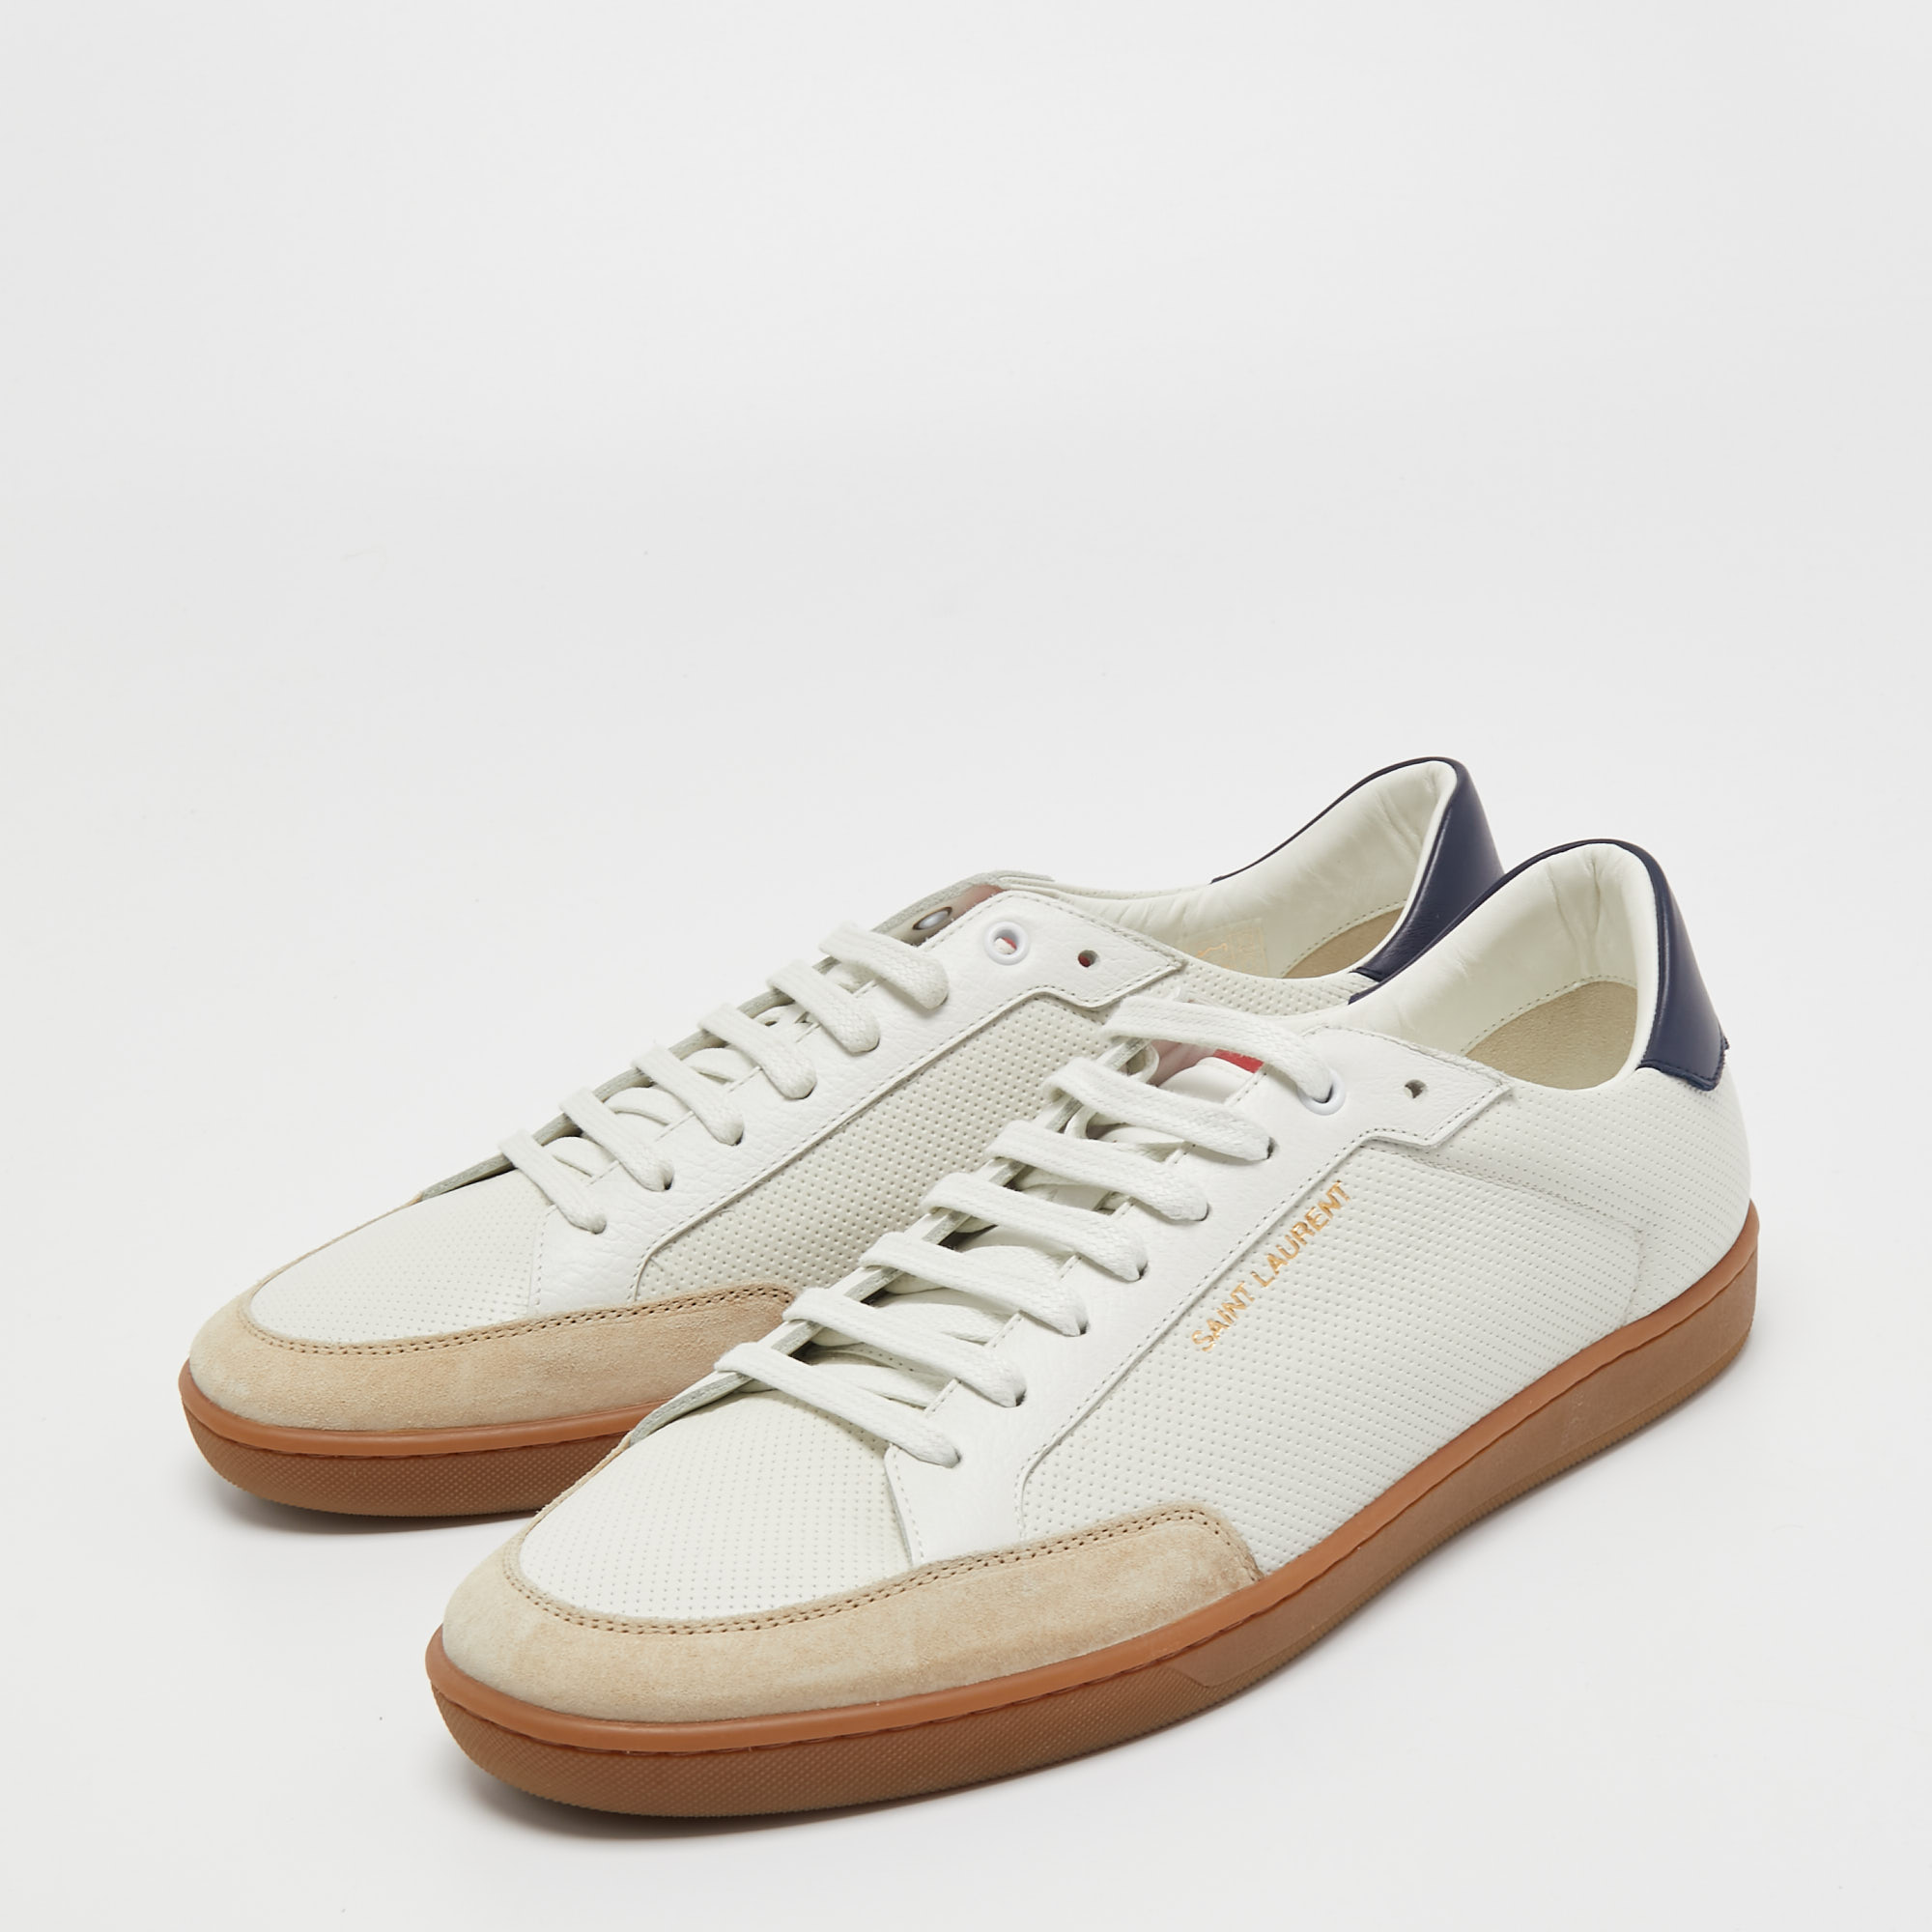 

Saint Laurent Tricolor Perforated Leather and Suede Court Classic Low Top Sneakers Size, White